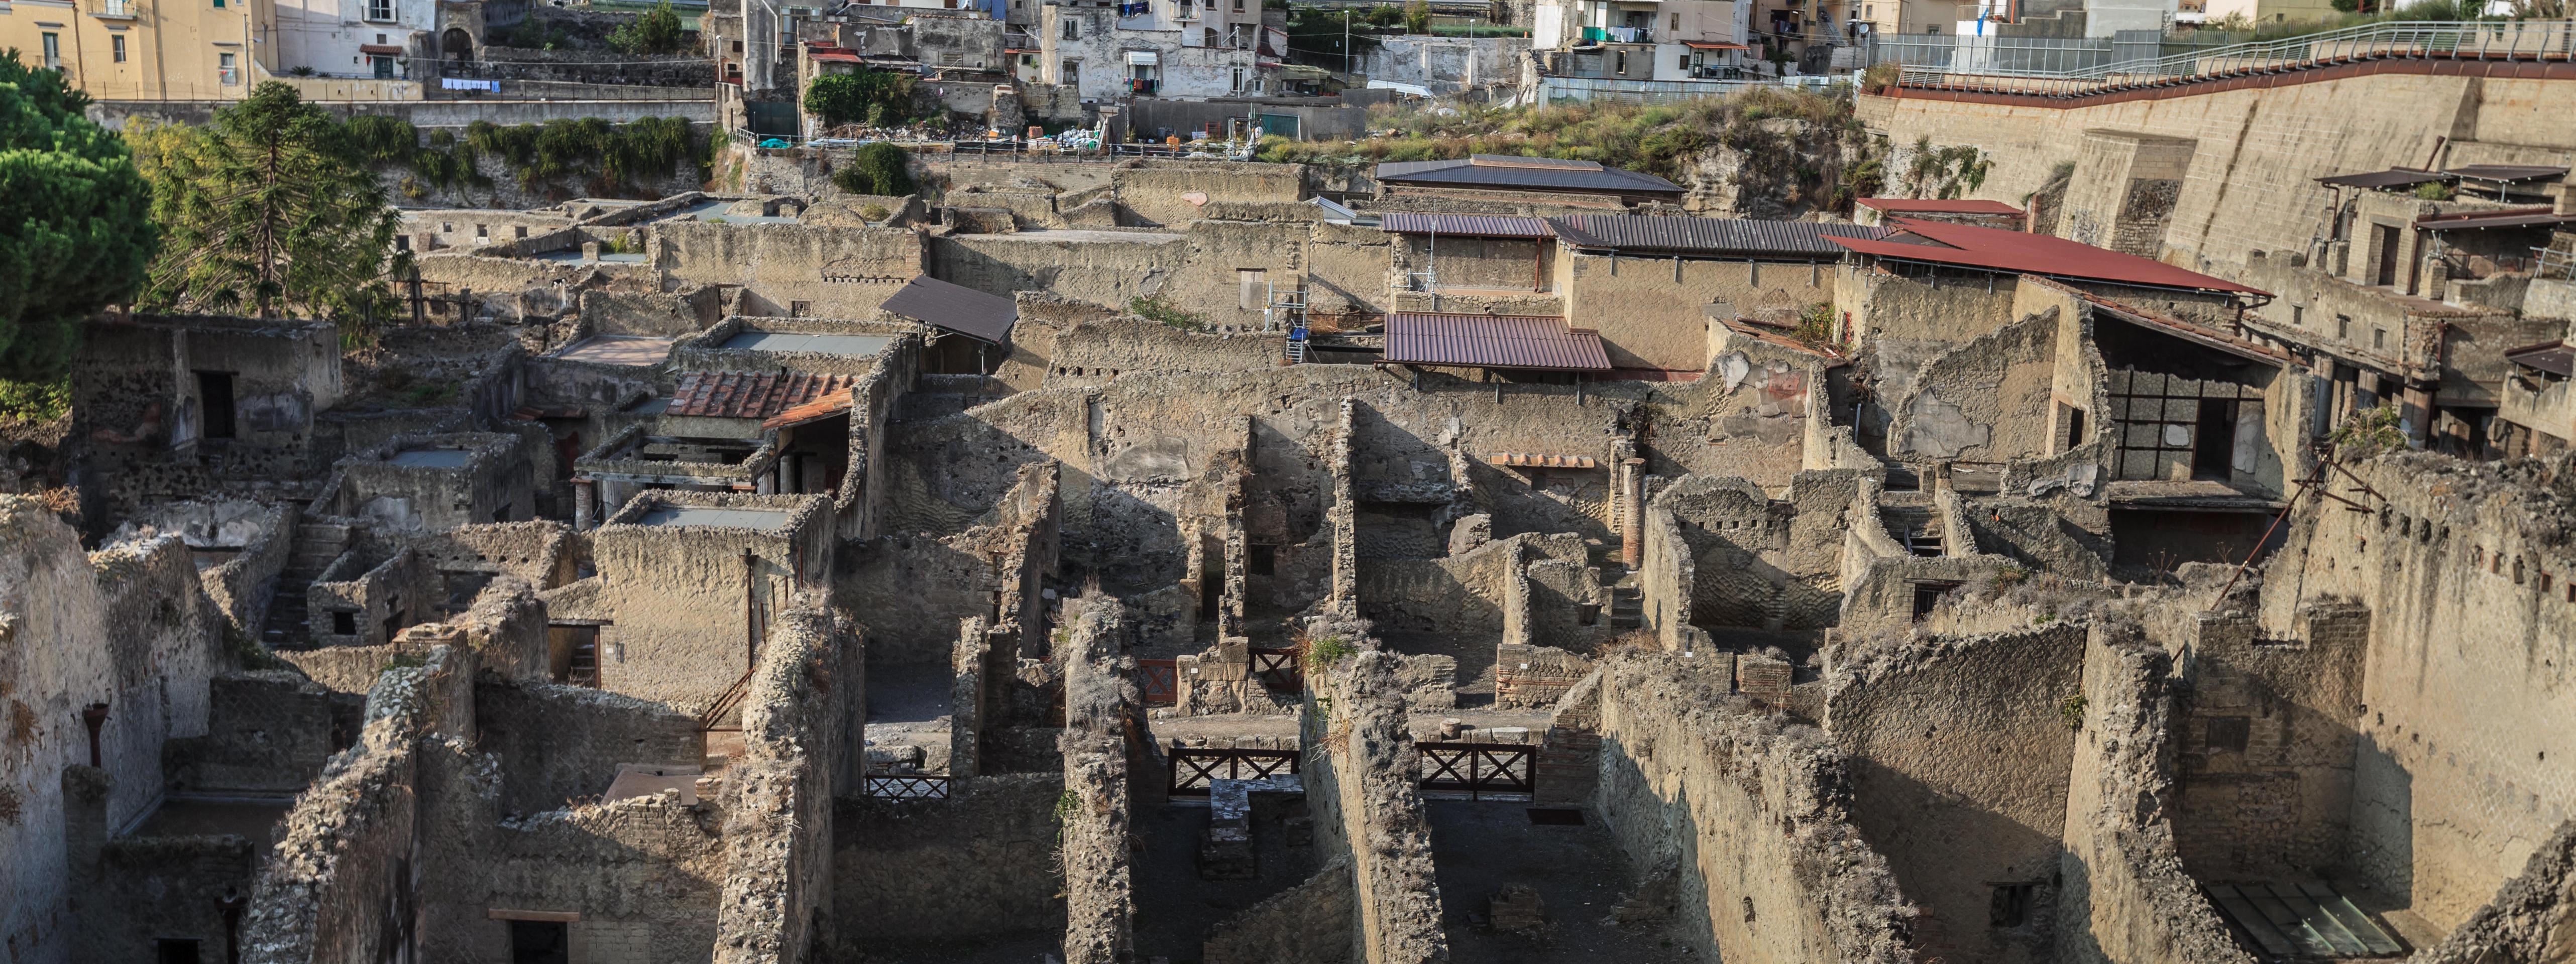 Transfer to Pompeii and Herculaneum - leaving from Naples